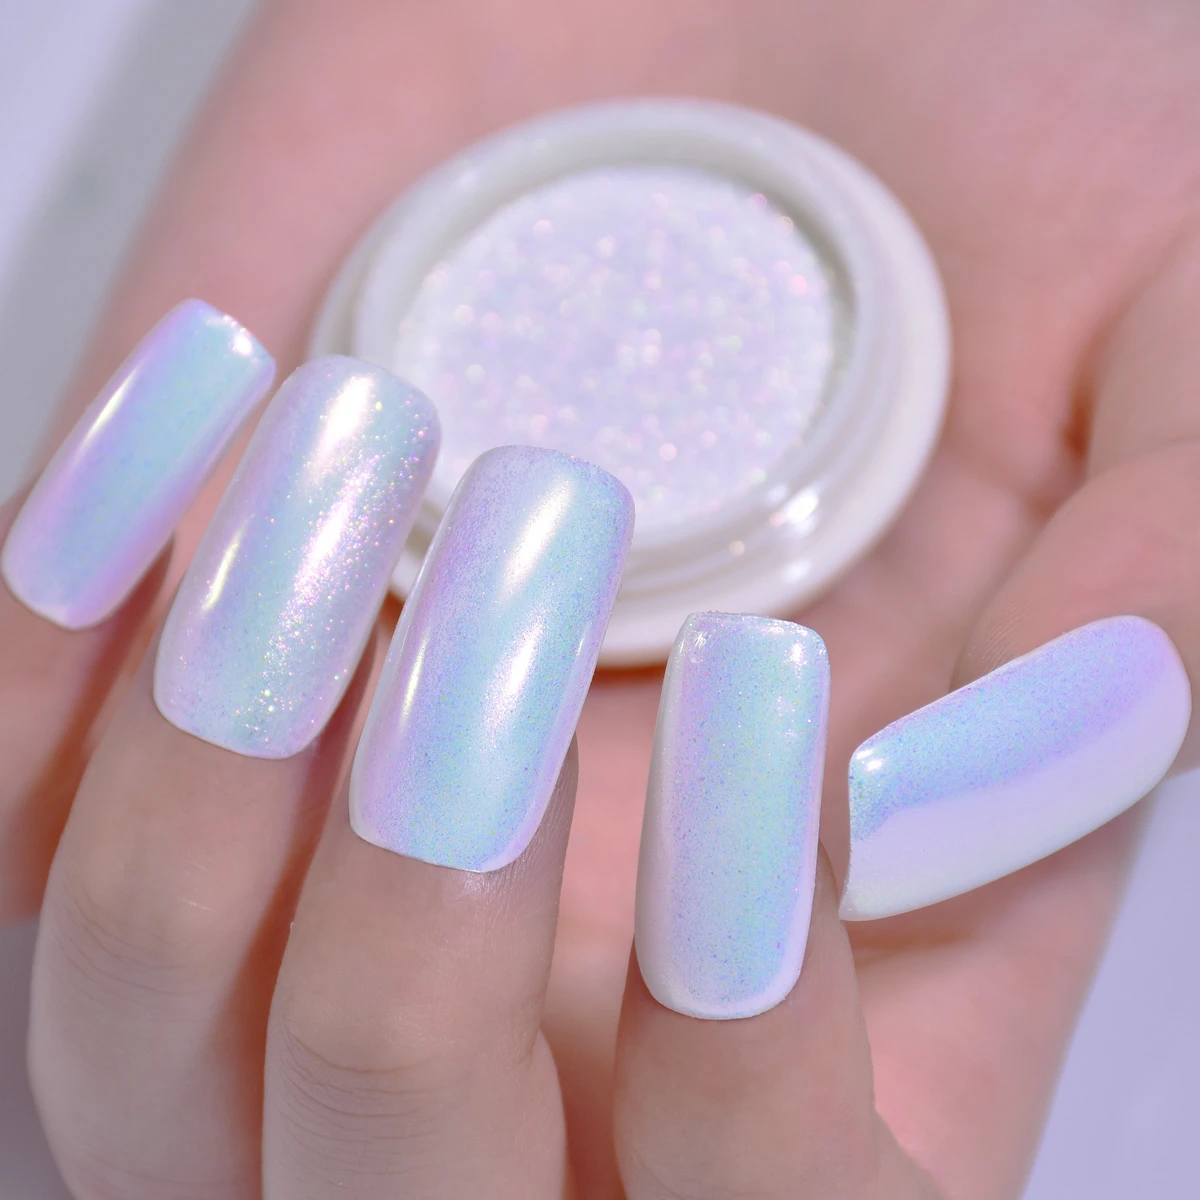 0.3g Mermaid Nail Acrylic Powder Pearl Shell Glimmer Dust Pretty Shimmer Laser Glitters Art Decorations Nails Accessoires Ongle